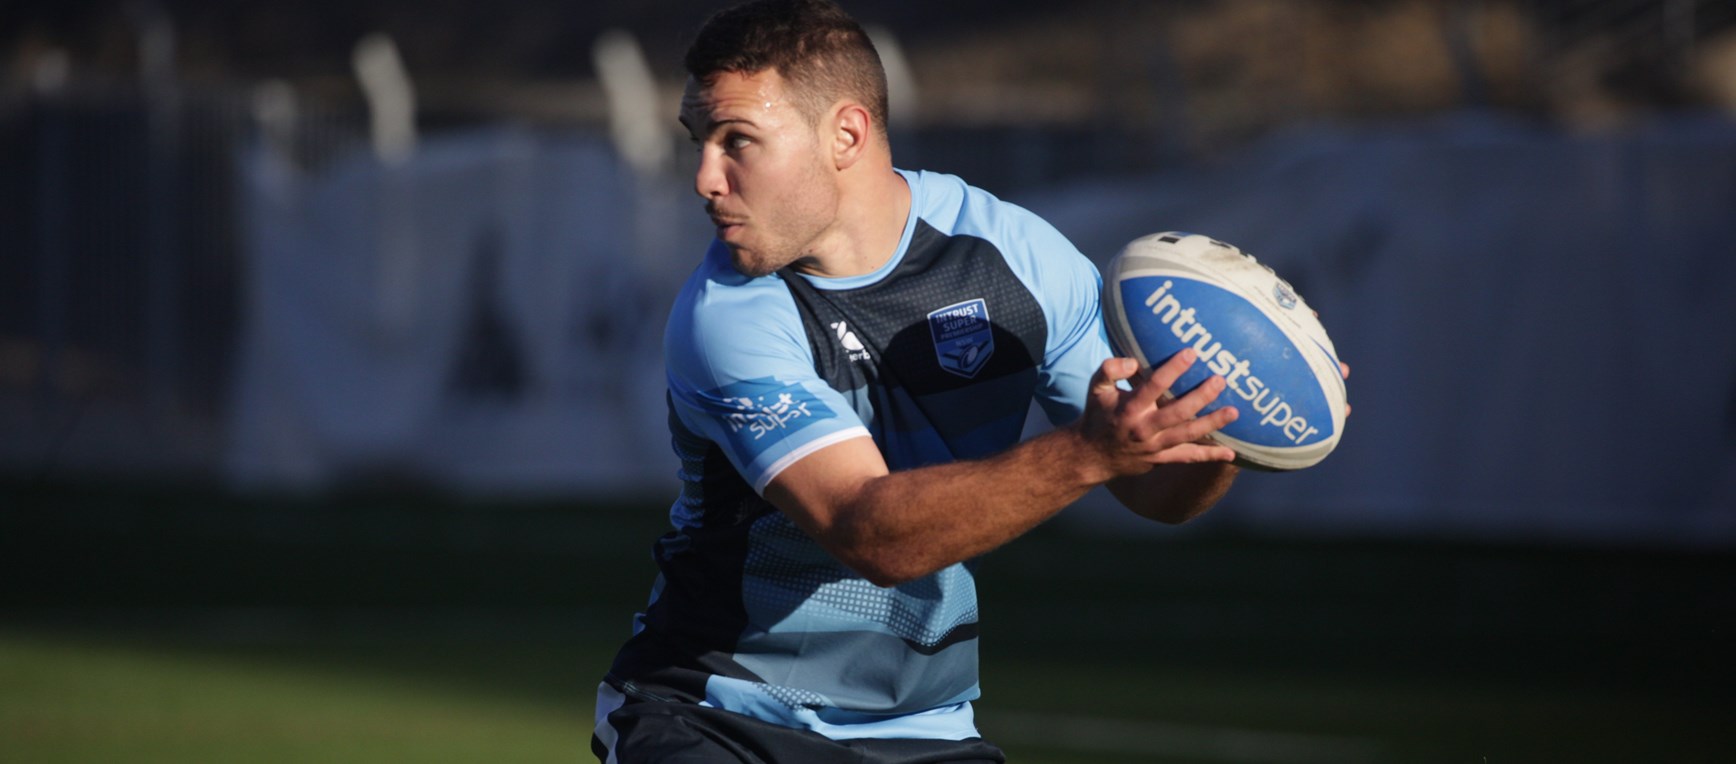 GALLERY | NSW Residents Captains Run